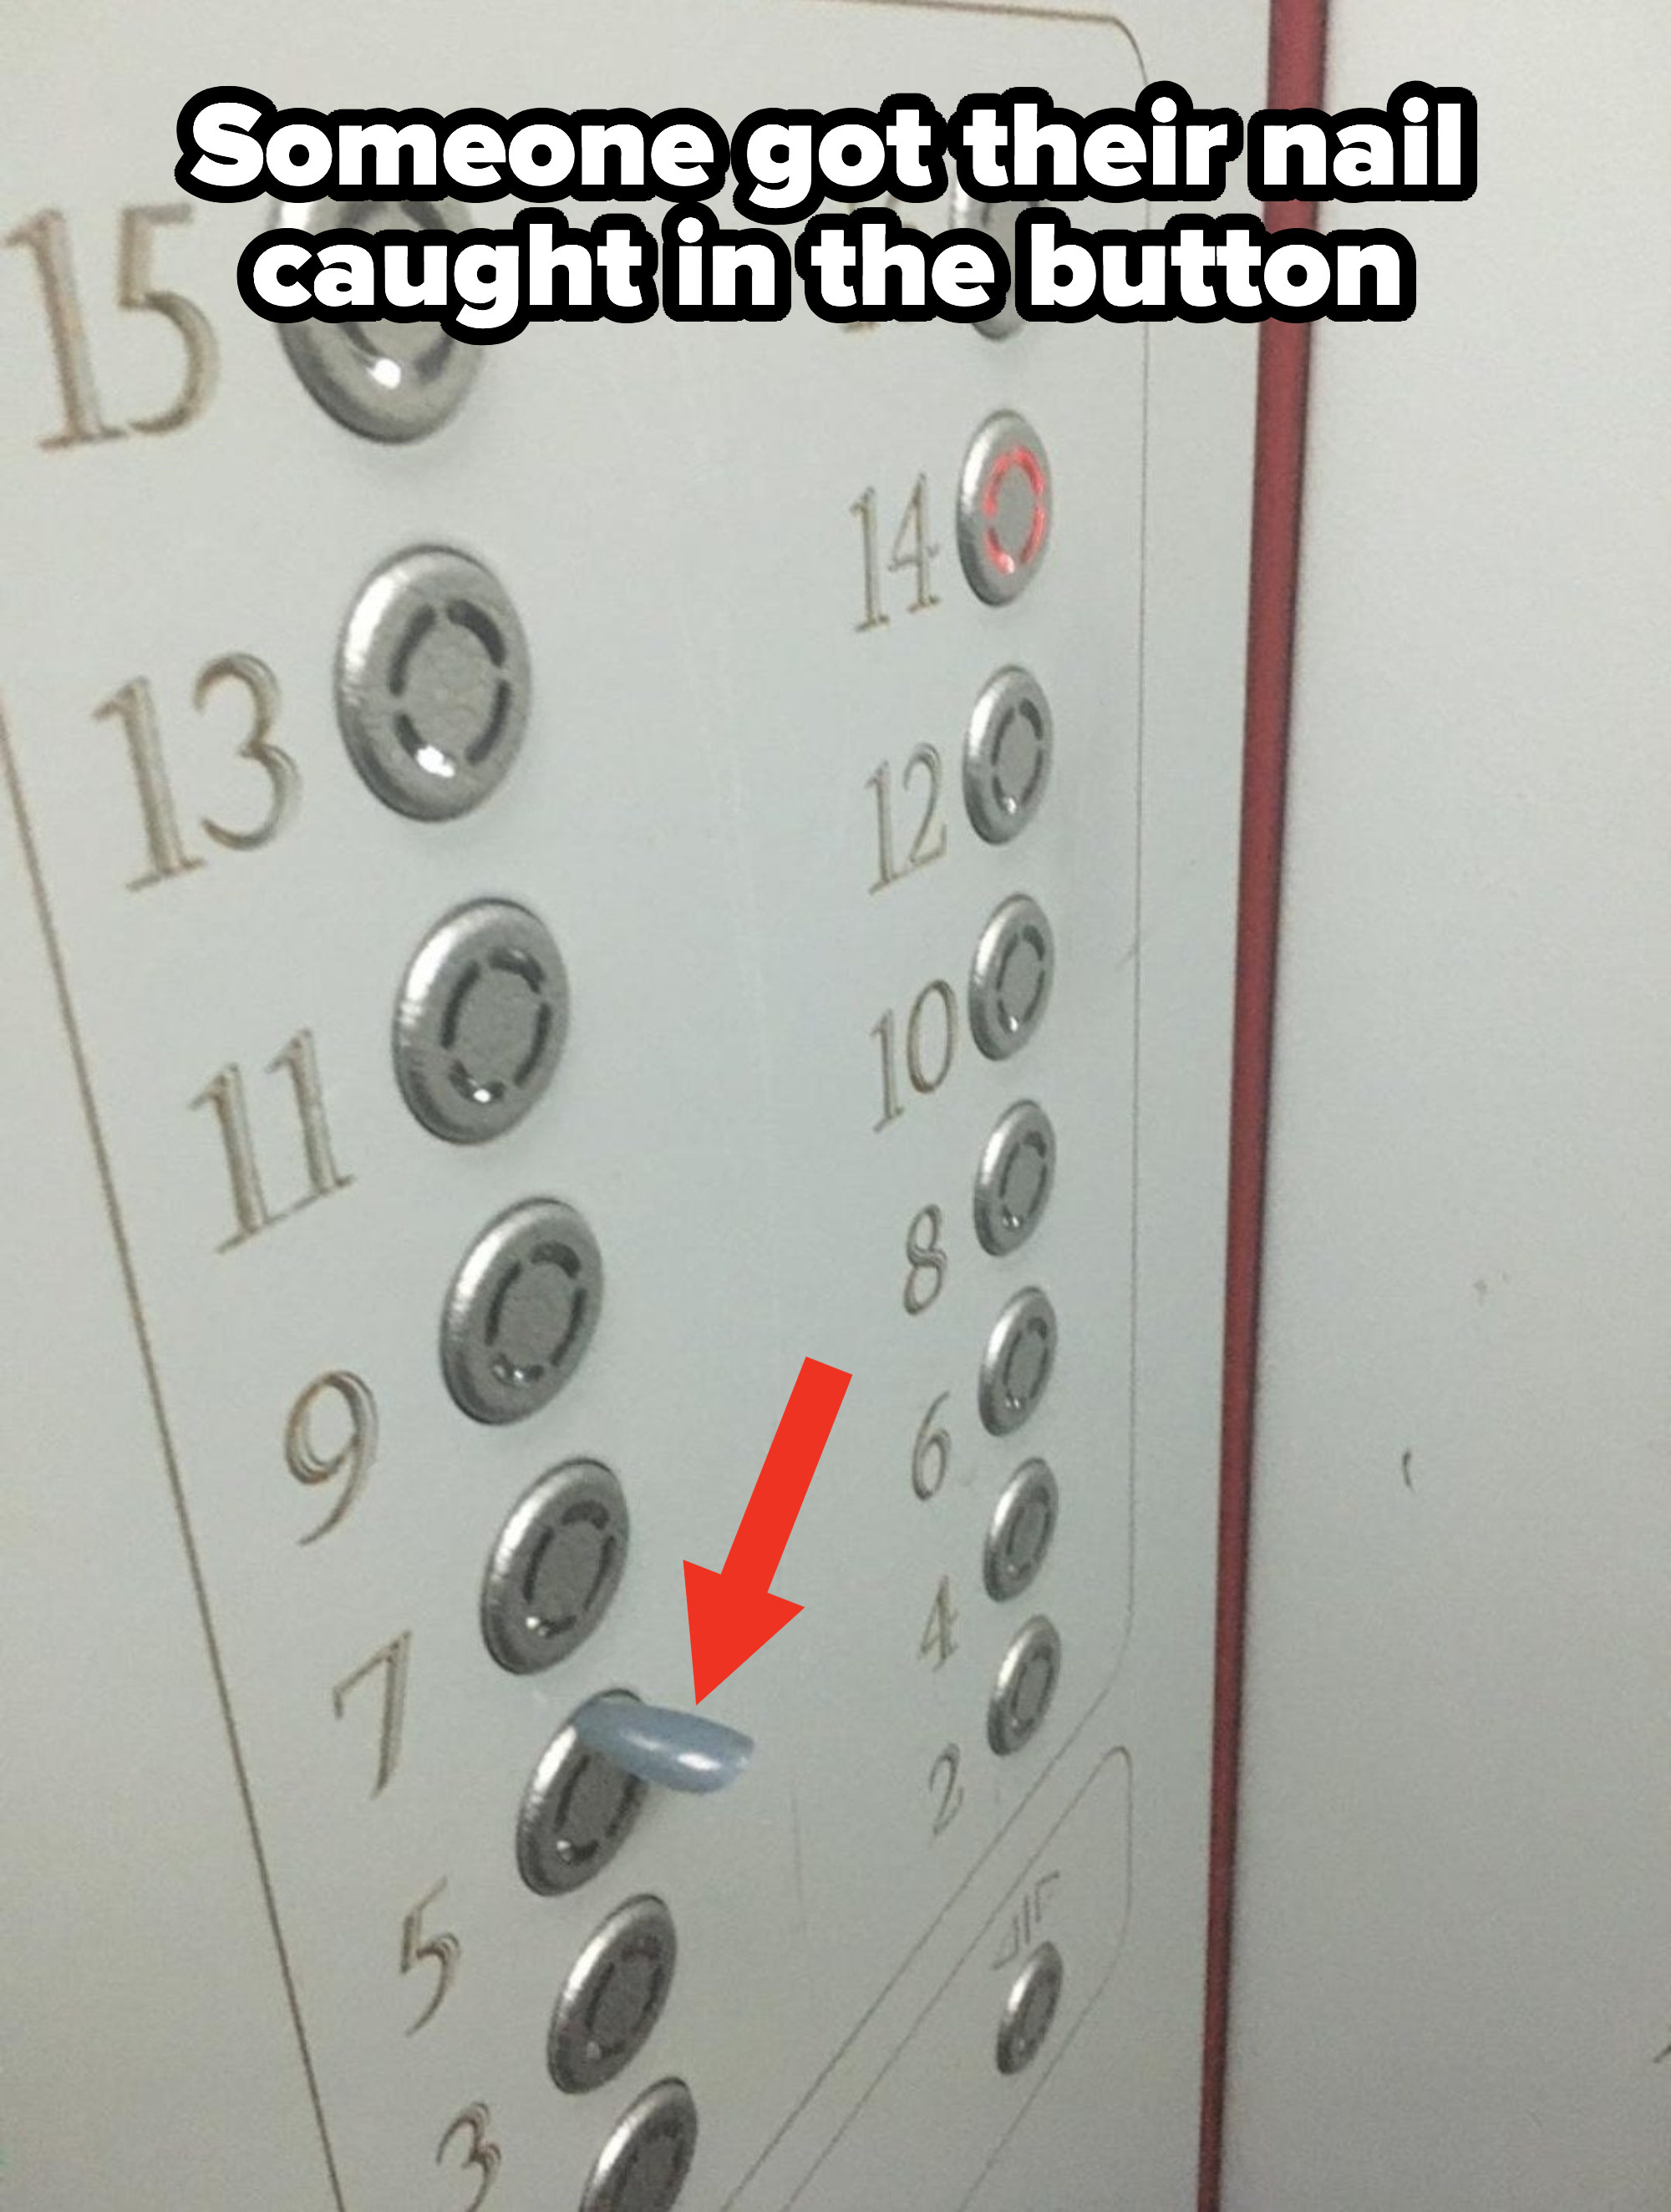 nail caught in an elevator button